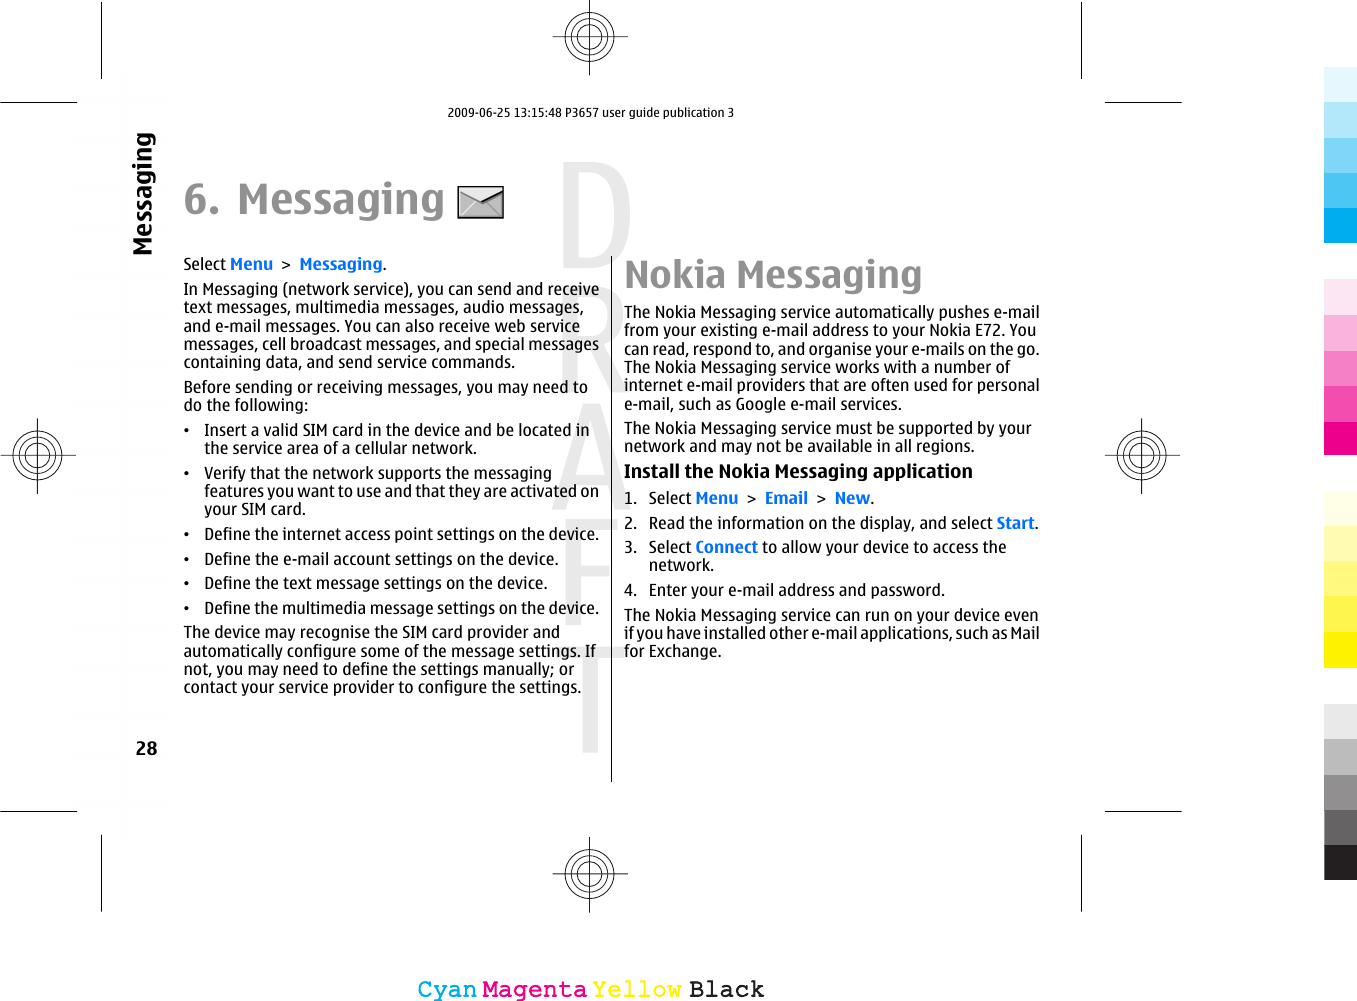 6. MessagingSelect Menu &gt; Messaging.In Messaging (network service), you can send and receivetext messages, multimedia messages, audio messages,and e-mail messages. You can also receive web servicemessages, cell broadcast messages, and special messagescontaining data, and send service commands.Before sending or receiving messages, you may need todo the following:•Insert a valid SIM card in the device and be located inthe service area of a cellular network.•Verify that the network supports the messagingfeatures you want to use and that they are activated onyour SIM card.•Define the internet access point settings on the device.•Define the e-mail account settings on the device.•Define the text message settings on the device.•Define the multimedia message settings on the device.The device may recognise the SIM card provider andautomatically configure some of the message settings. Ifnot, you may need to define the settings manually; orcontact your service provider to configure the settings.Nokia MessagingThe Nokia Messaging service automatically pushes e-mailfrom your existing e-mail address to your Nokia E72. Youcan read, respond to, and organise your e-mails on the go.The Nokia Messaging service works with a number ofinternet e-mail providers that are often used for personale-mail, such as Google e-mail services.The Nokia Messaging service must be supported by yournetwork and may not be available in all regions.Install the Nokia Messaging application1. Select Menu &gt; Email &gt; New.2. Read the information on the display, and select Start.3. Select Connect to allow your device to access thenetwork.4. Enter your e-mail address and password.The Nokia Messaging service can run on your device evenif you have installed other e-mail applications, such as Mailfor Exchange.28MessagingCyanCyanMagentaMagentaYellowYellowBlackBlack2009-06-25 13:15:48 P3657 user guide publication 3